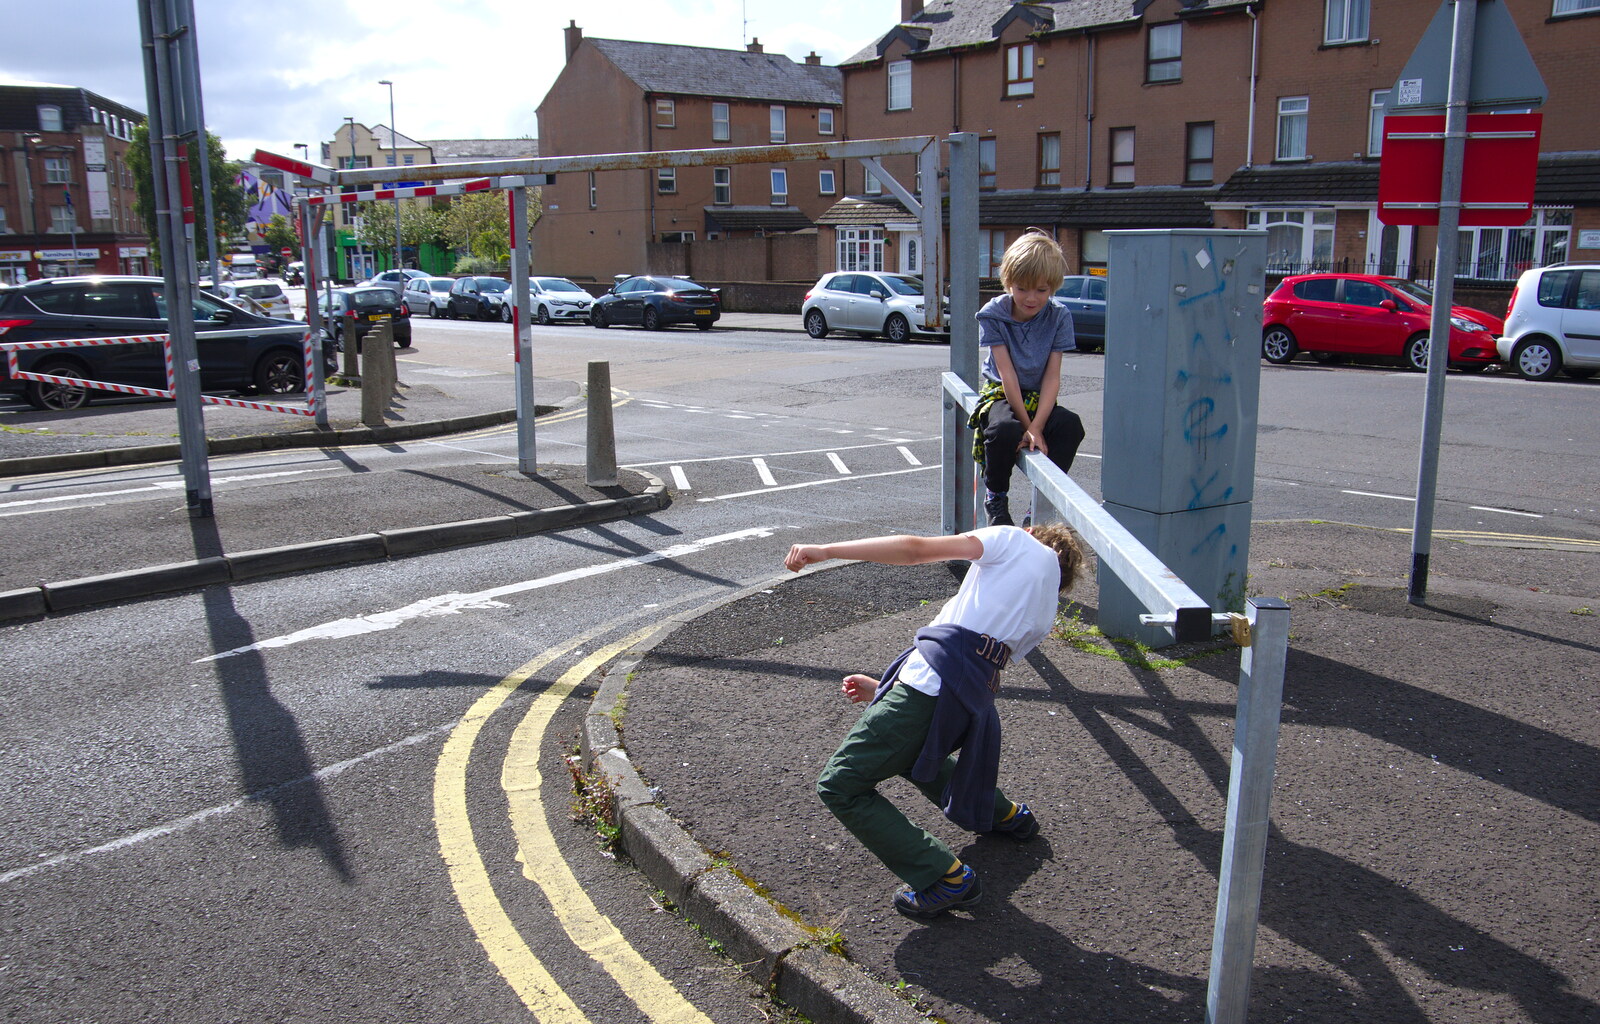 The boys mess around at William Street car park from A Day in Derry, County Londonderry, Northern Ireland - 15th August 2019